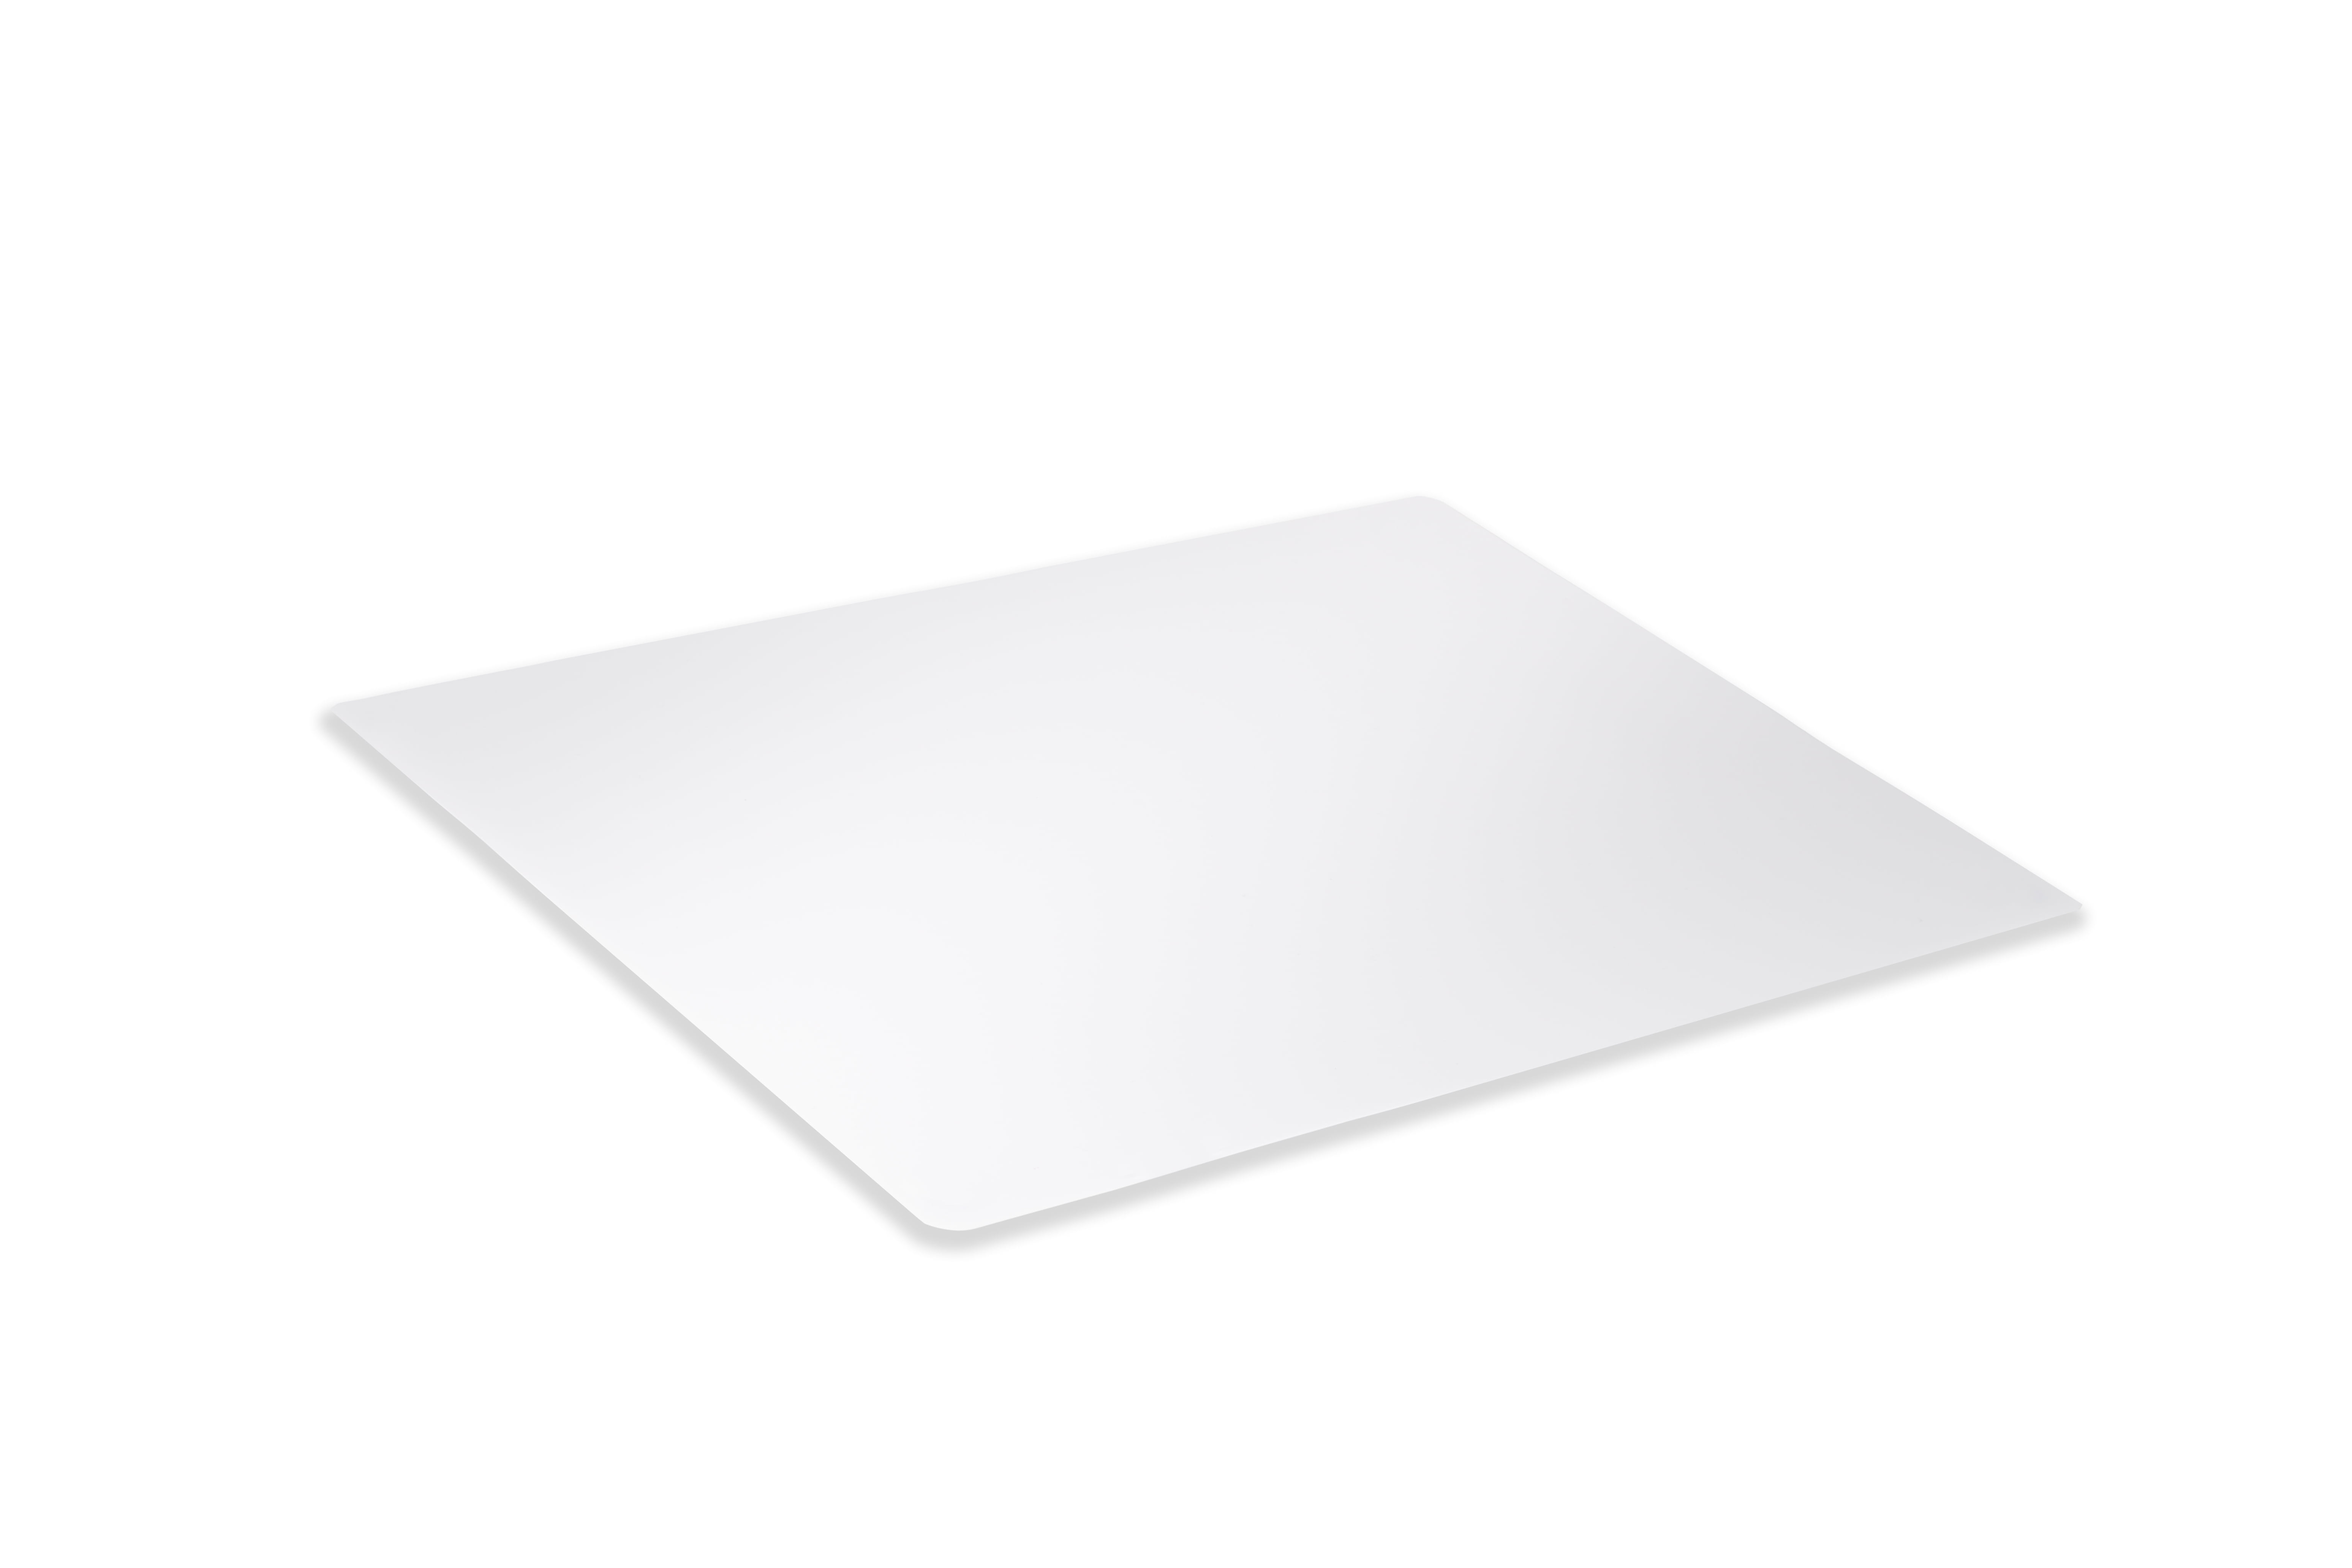 Saran Disposable Cutting Sheets 20 Boards Discontinued - H4 for sale online